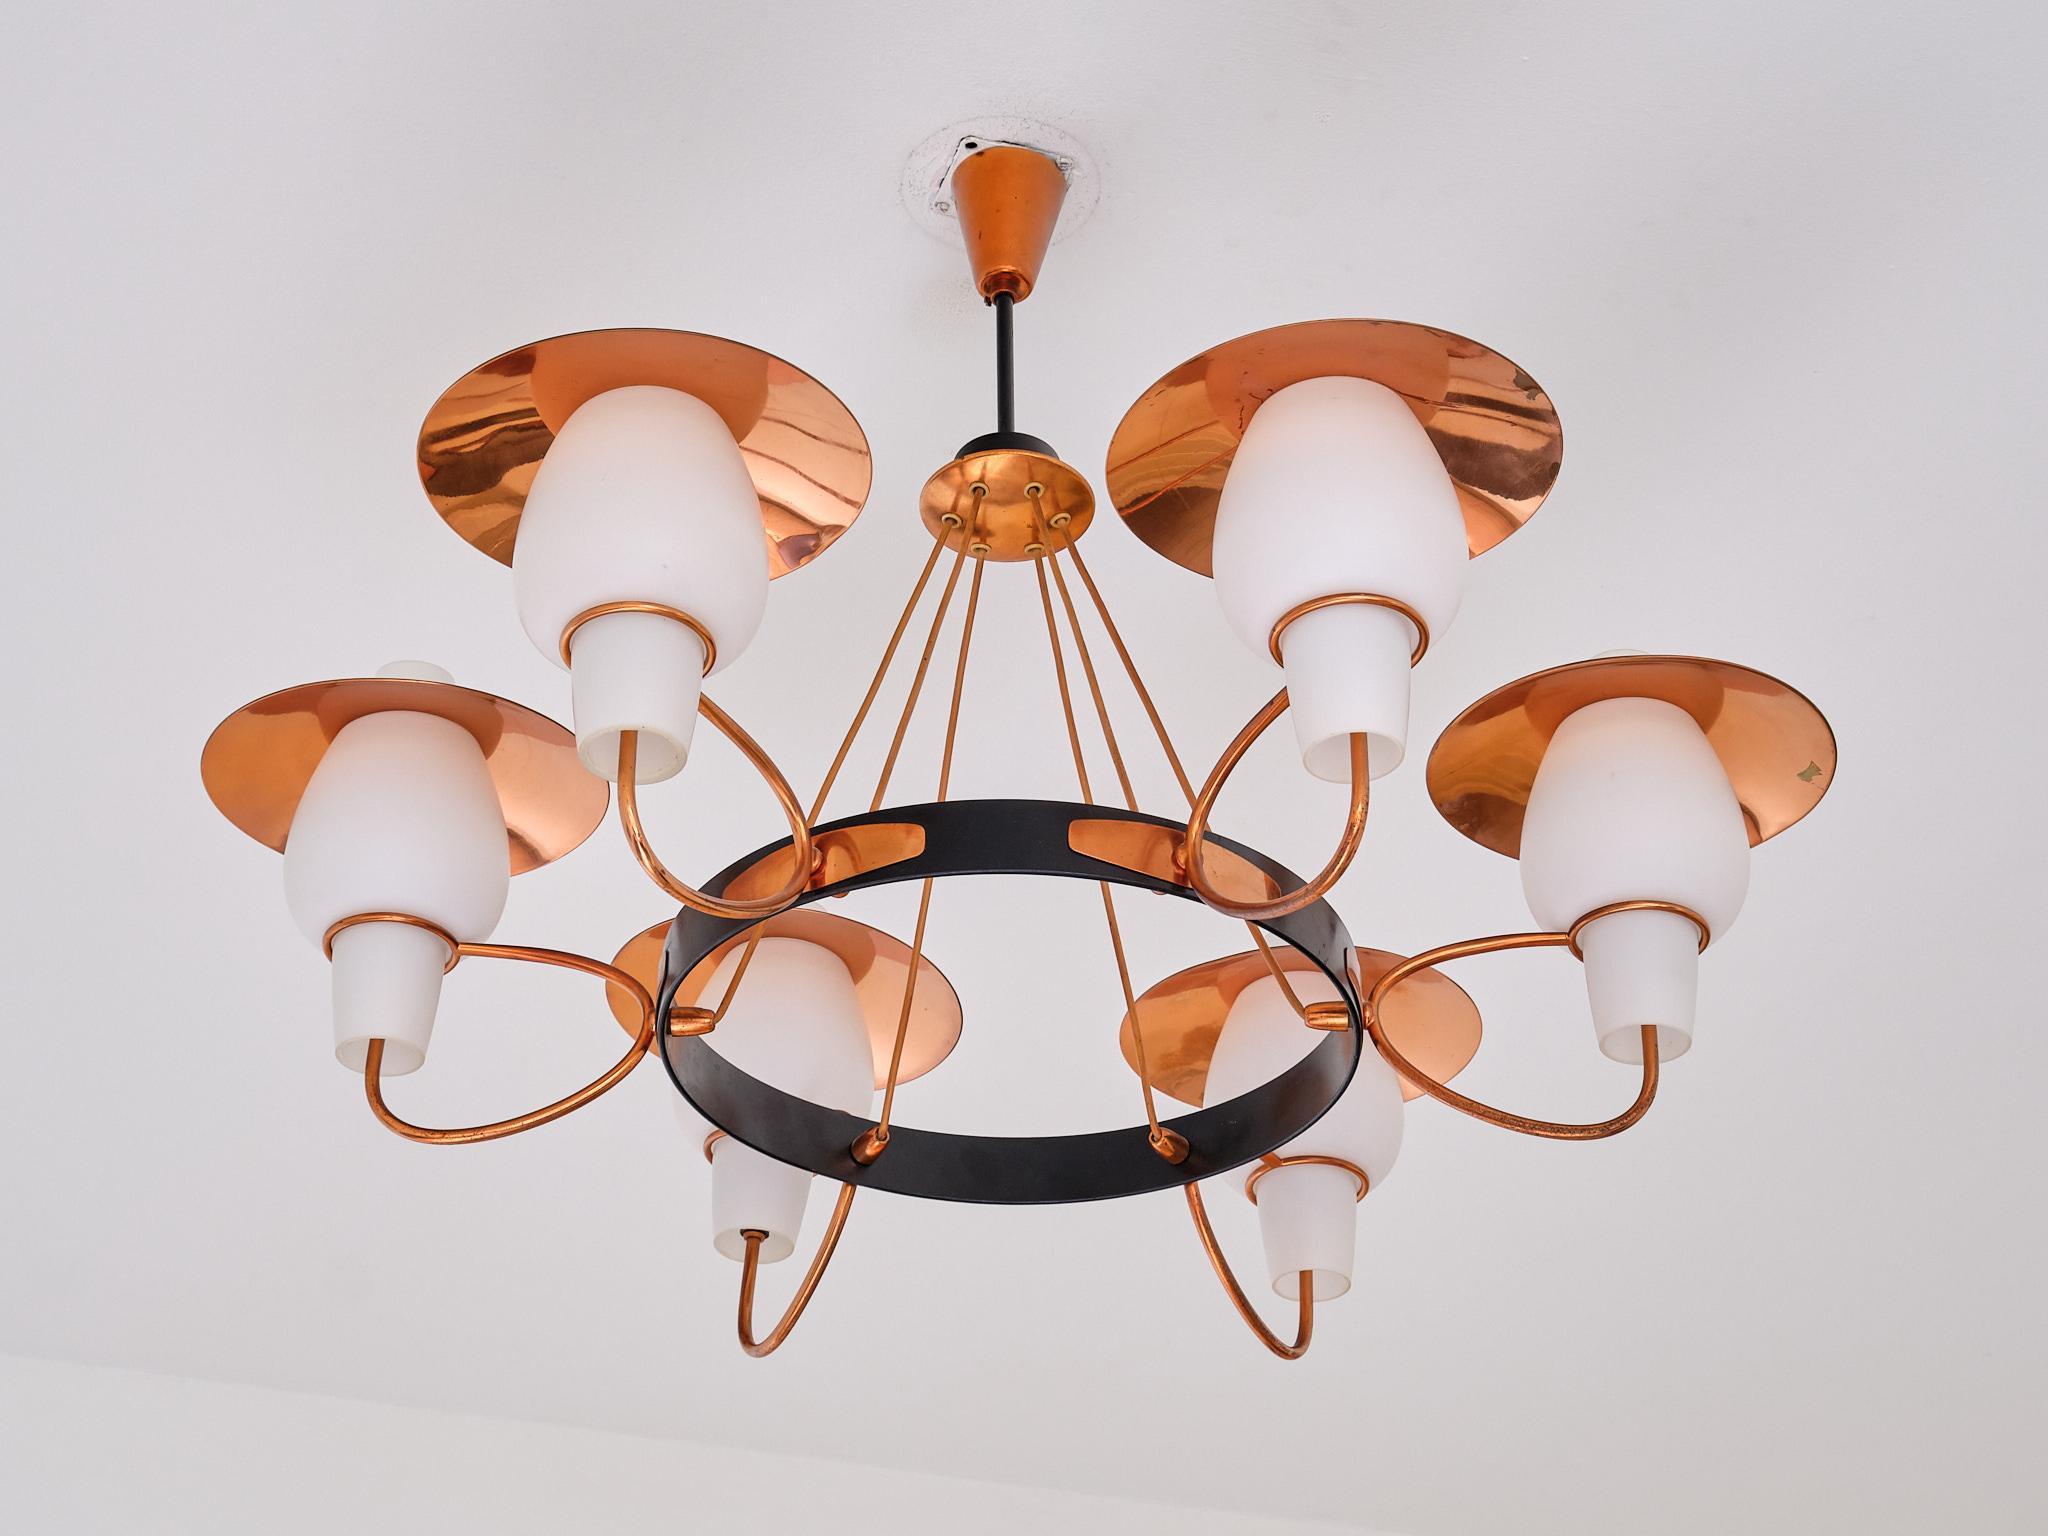 Mid-20th Century Danish Modern Six Arm Chandelier in Copper and Opaline Glass, 1960s For Sale